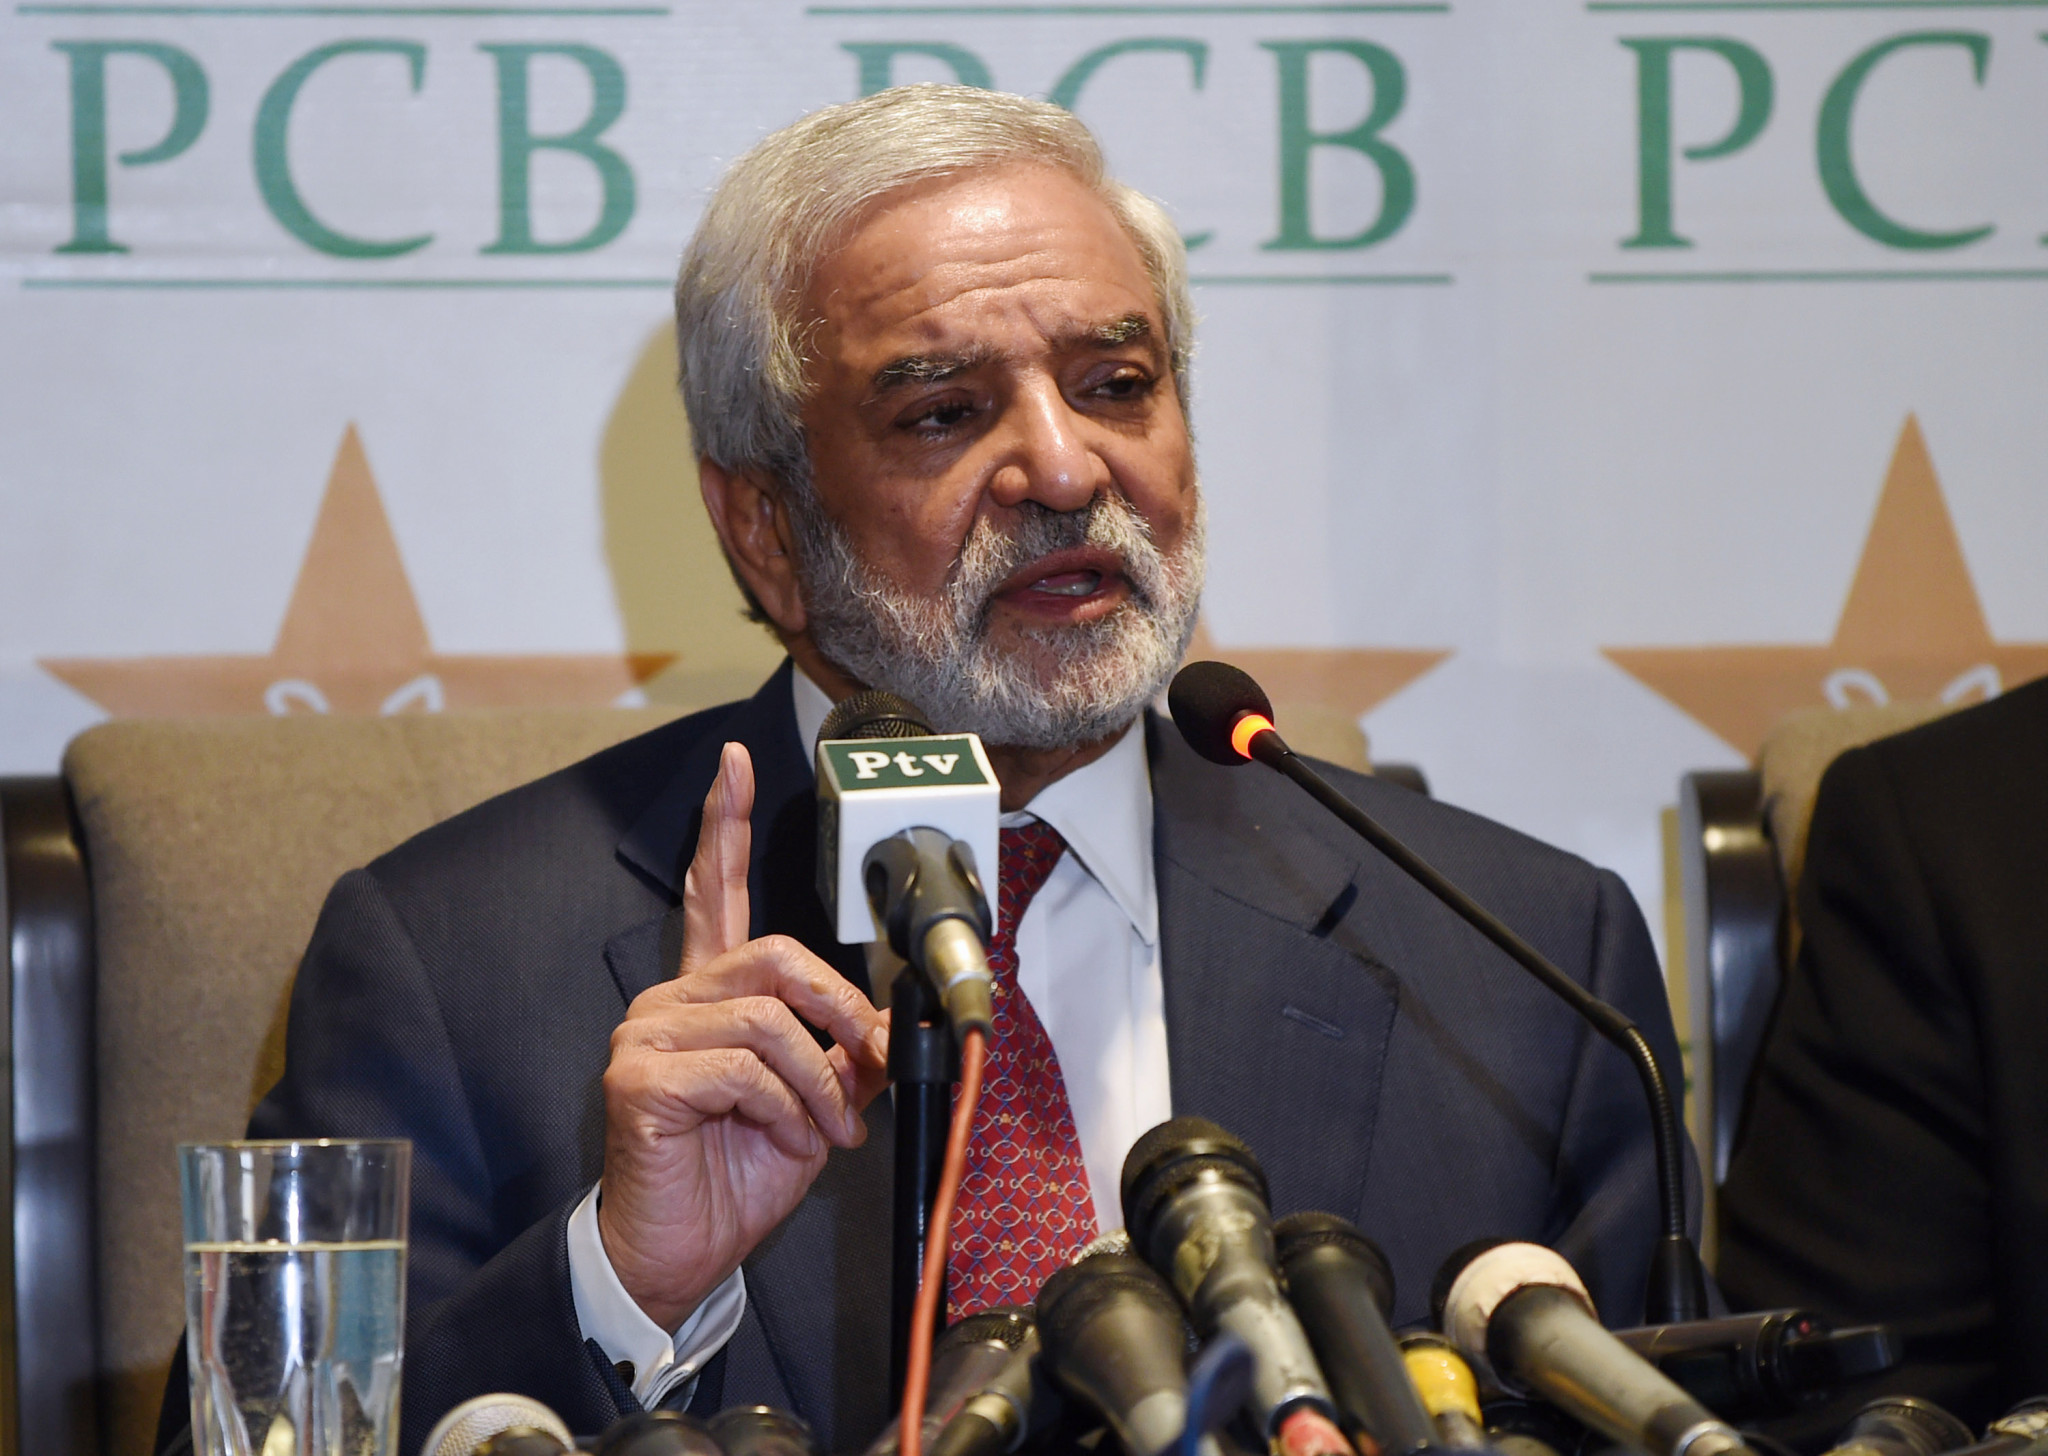 PCB threaten to push for T20 World Cup "relocation" over visa concerns